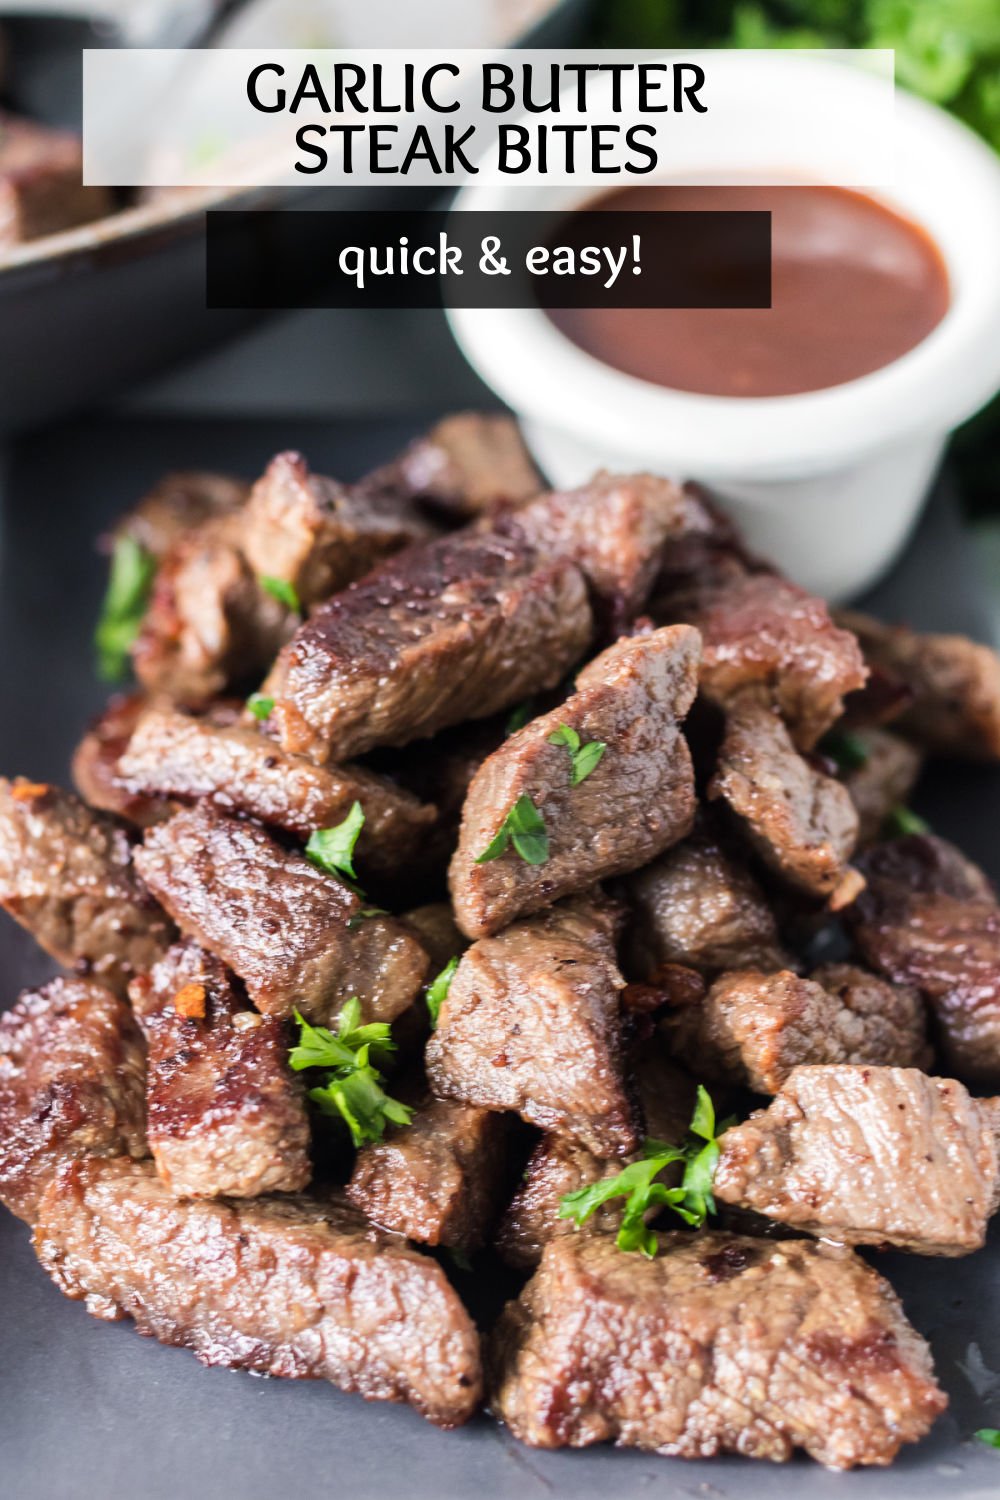 Garlic Steak Bites take just minutes to prepare...and minutes to eat! Served as a main dish with sides or as an appetizer, these bites are perfectly seasoned with just salt, pepper, garlic, and butter. | www.persnicketyplates.com